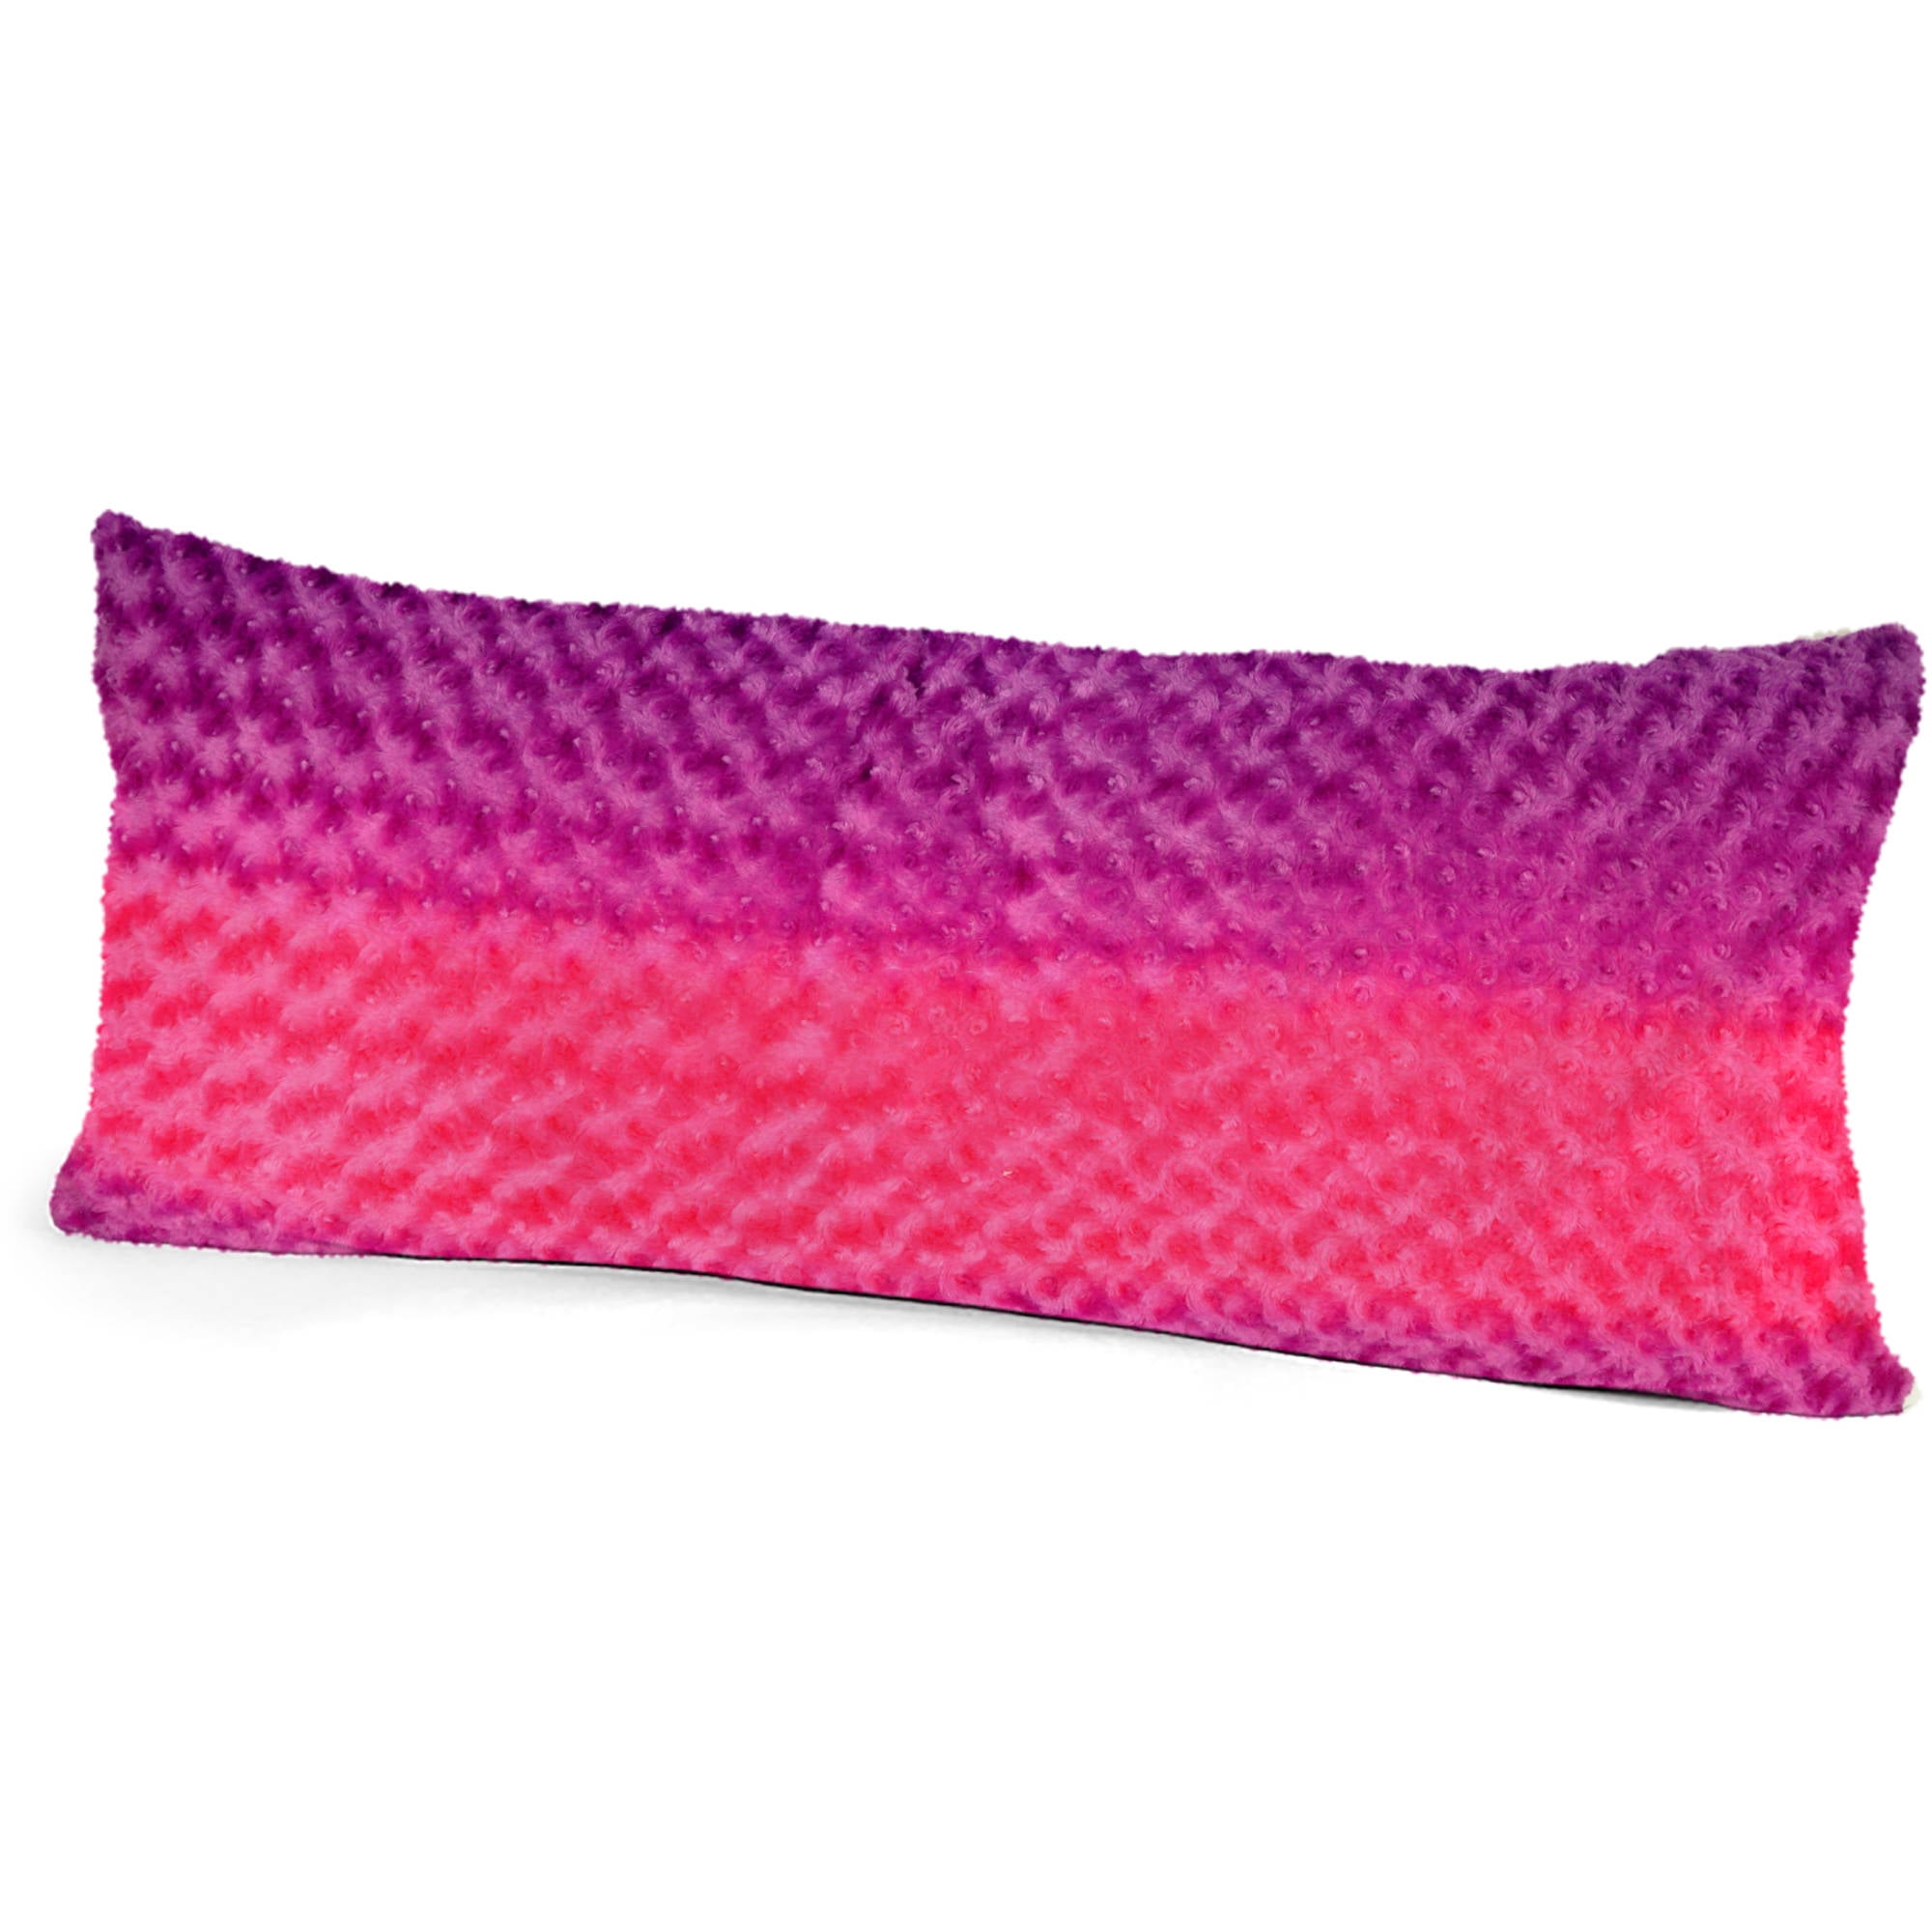 your zone pillows